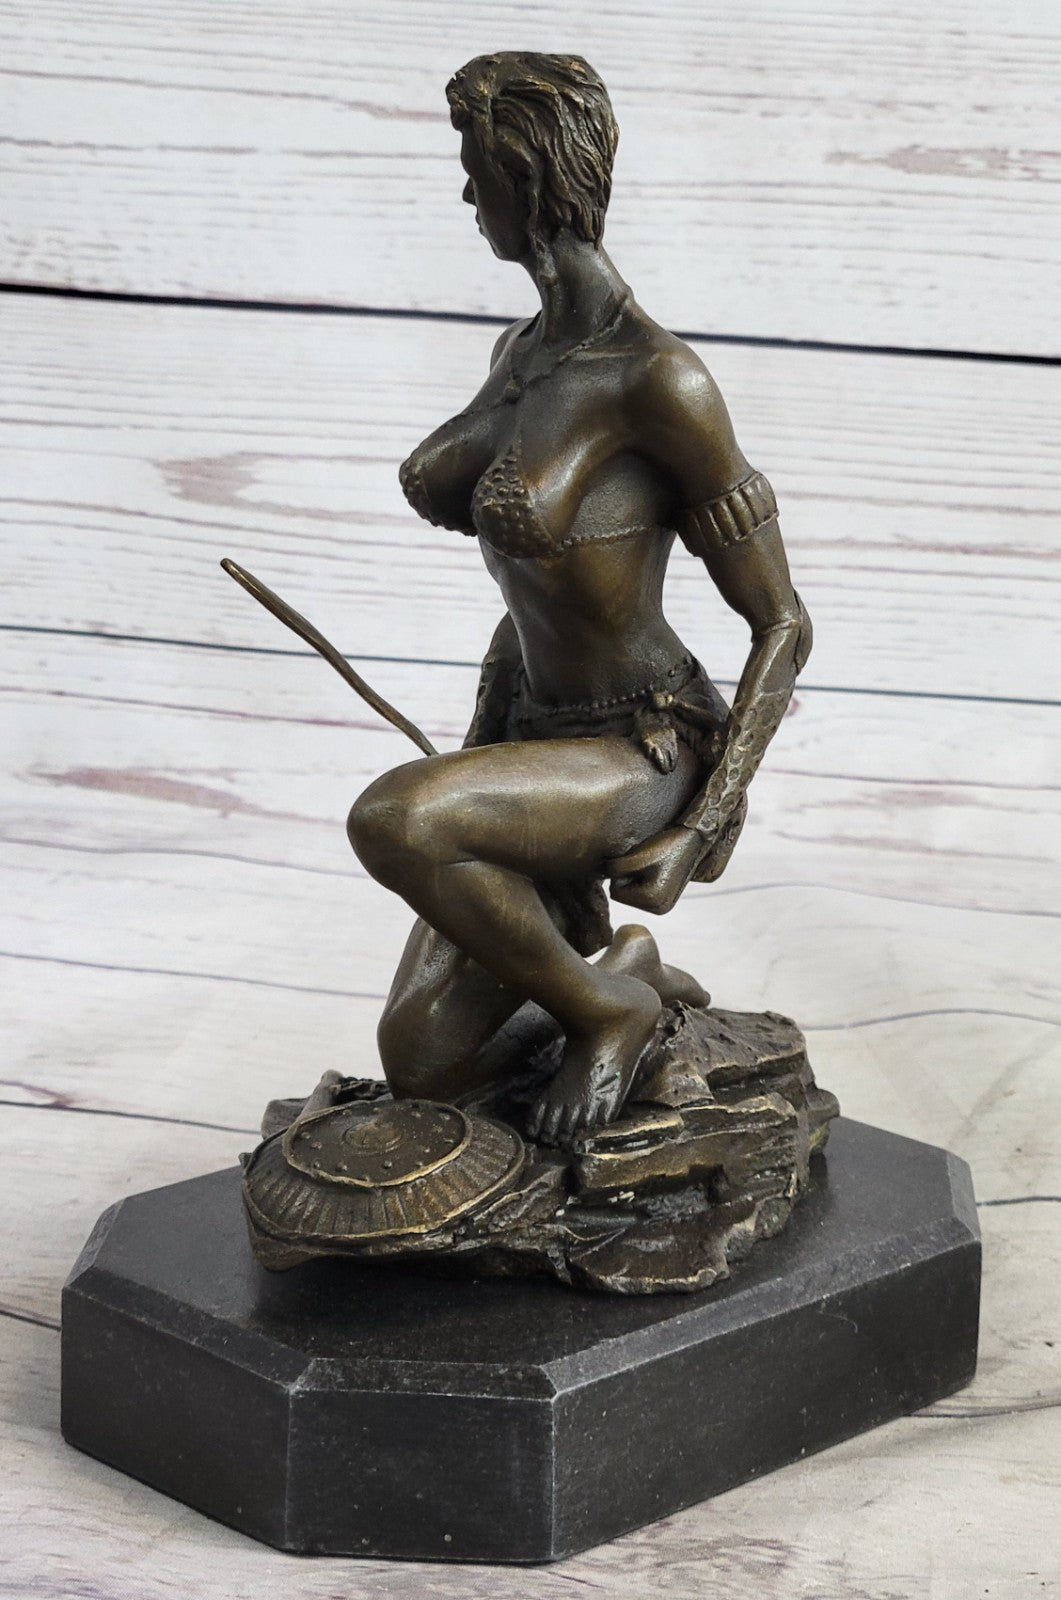 Handcrafted bronze sculpture SALE Sword With Woman Nude "Amazon" Signed Decor